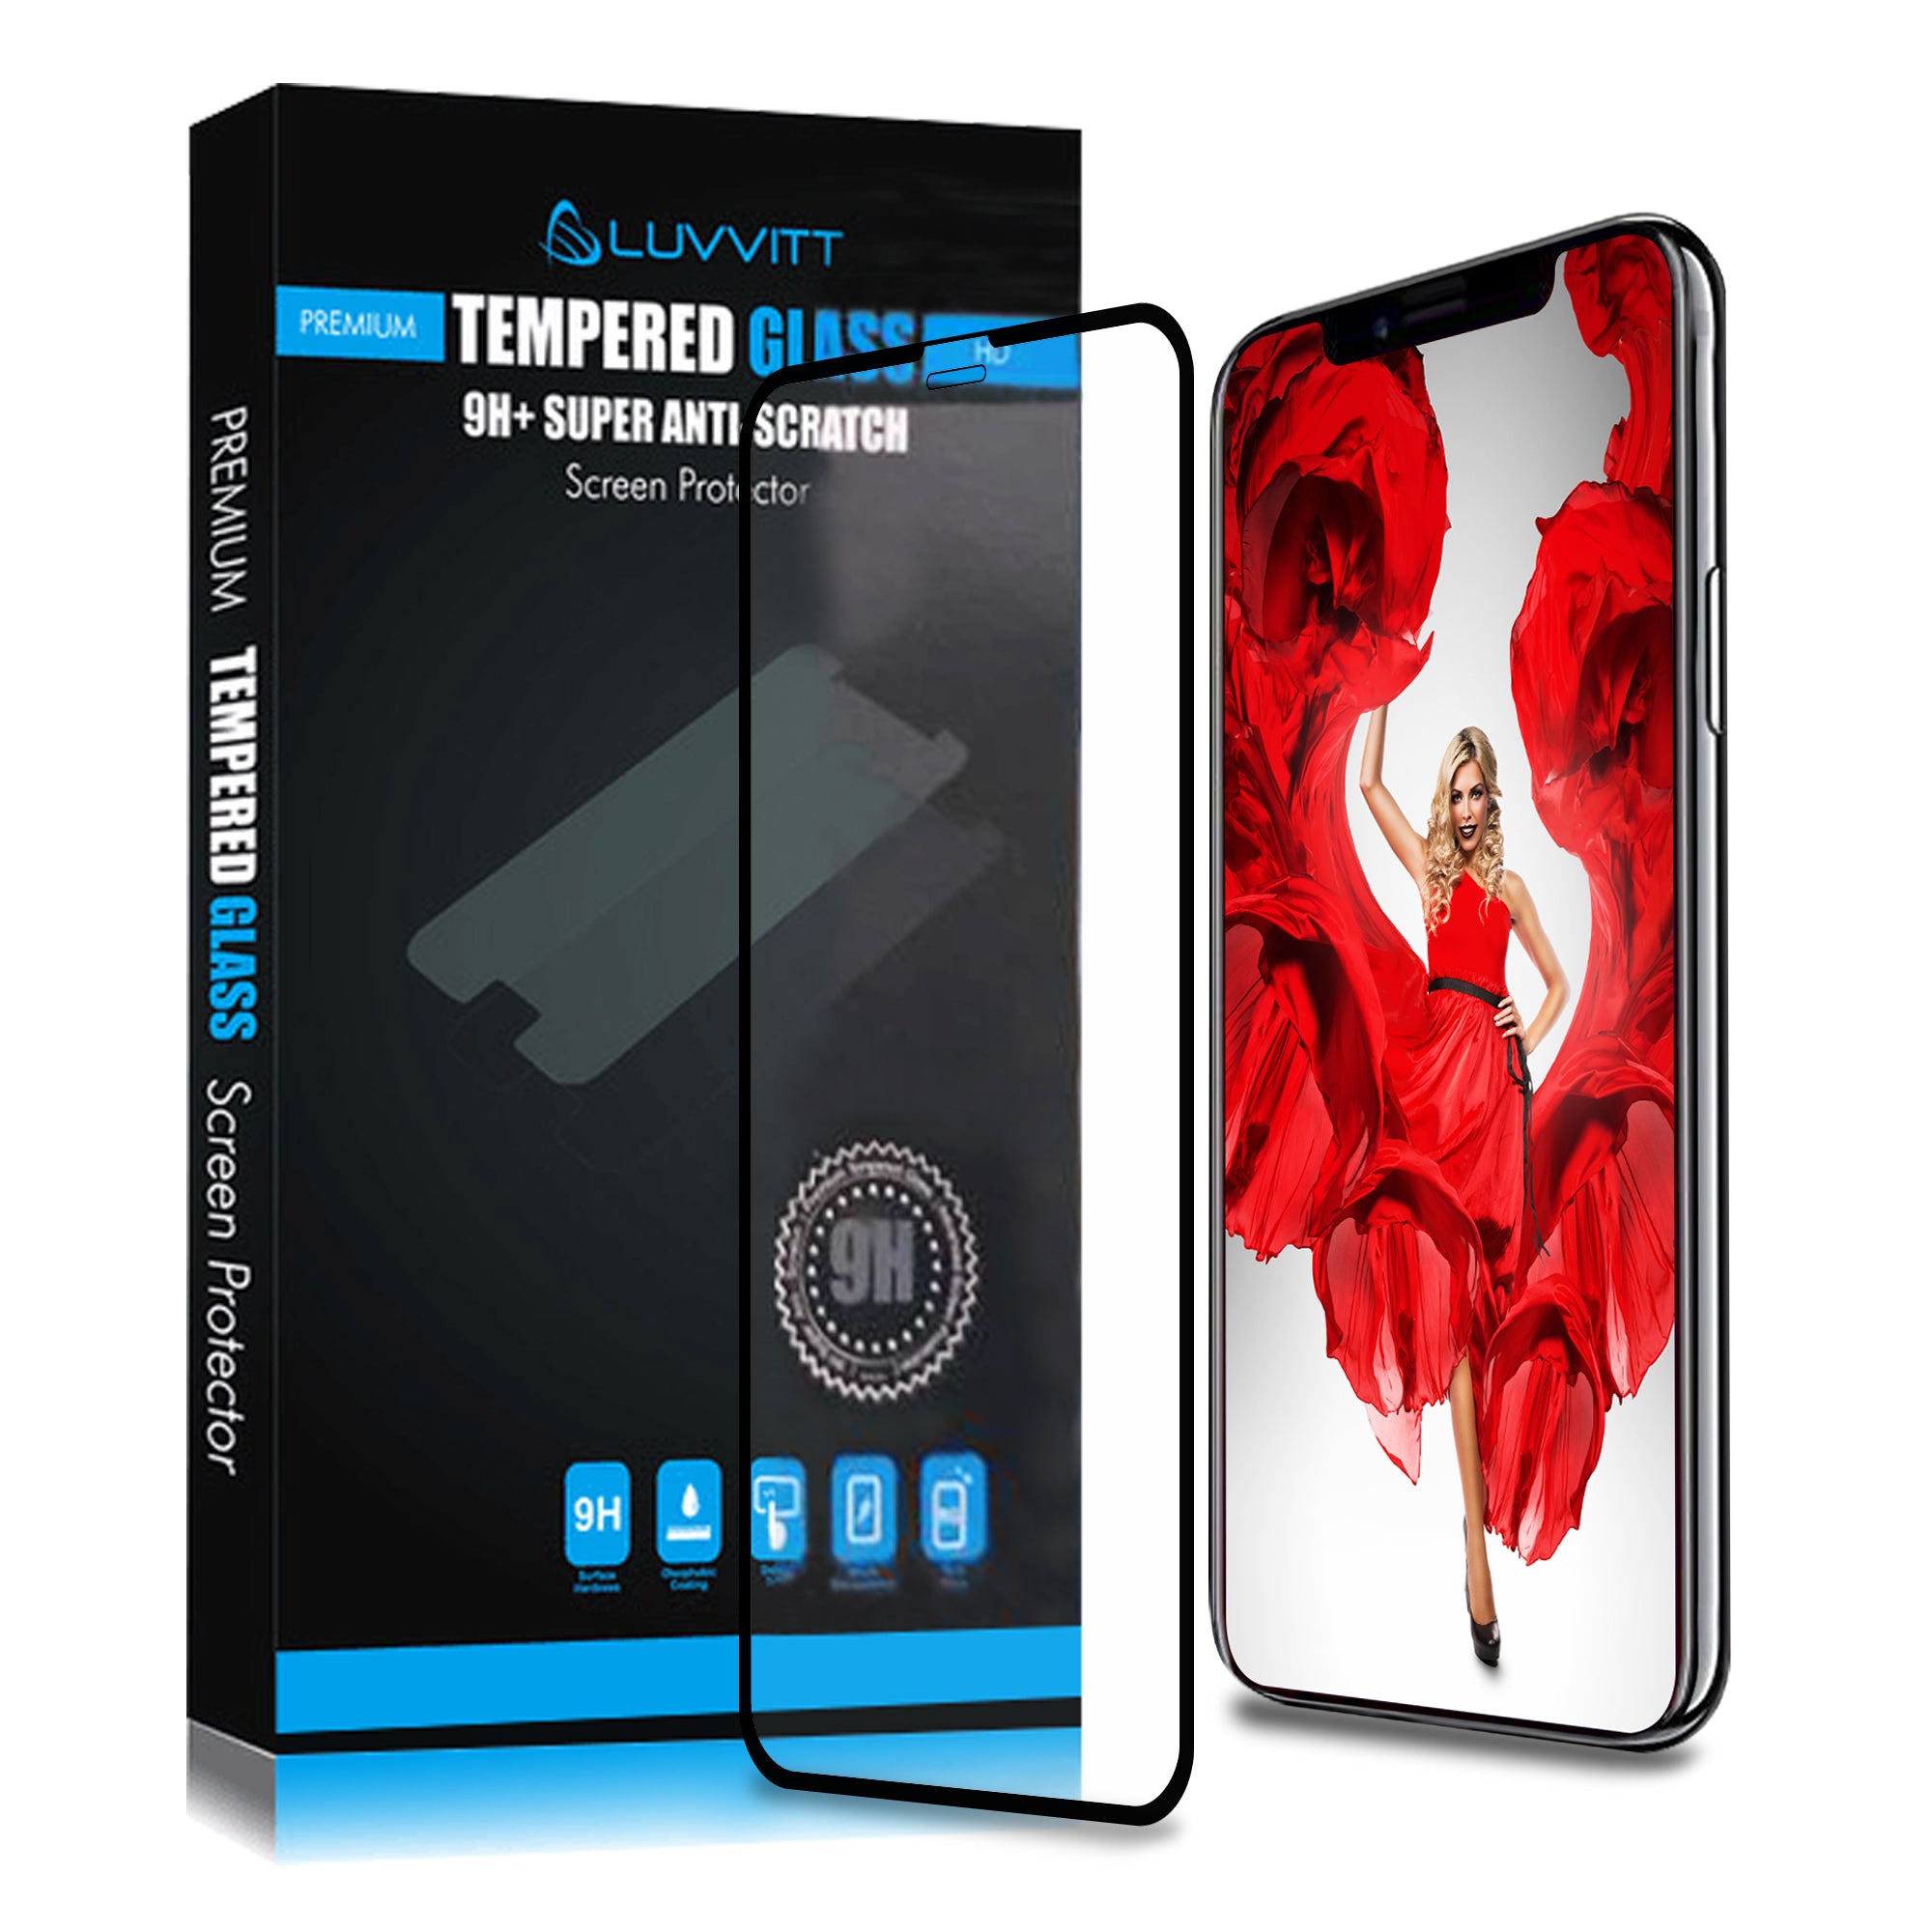 Luvvitt Tempered Glass Screen Protector for iPhone 11 Pro Max 2019